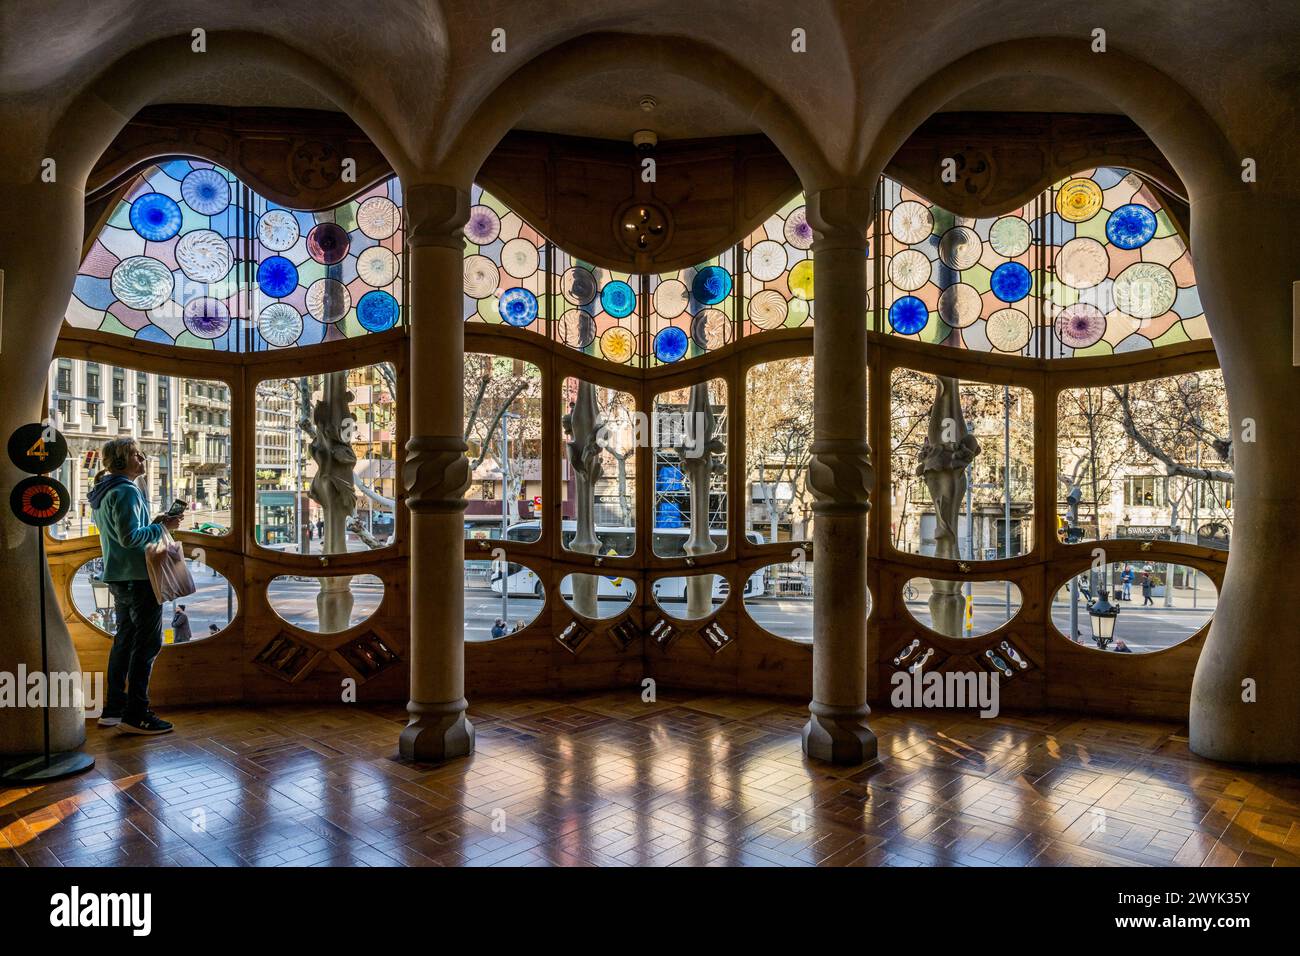 Spain, Catalonia, Barcelona, Eixample district, Passeig de Gracia, Casa Batllo by Catalan modernist architect Antoni Gaudi, UNESCO World Heritage site, central lounge and its glass roof with a sinuous profile designed to see without being seen using oculus placed in the lower part Stock Photo